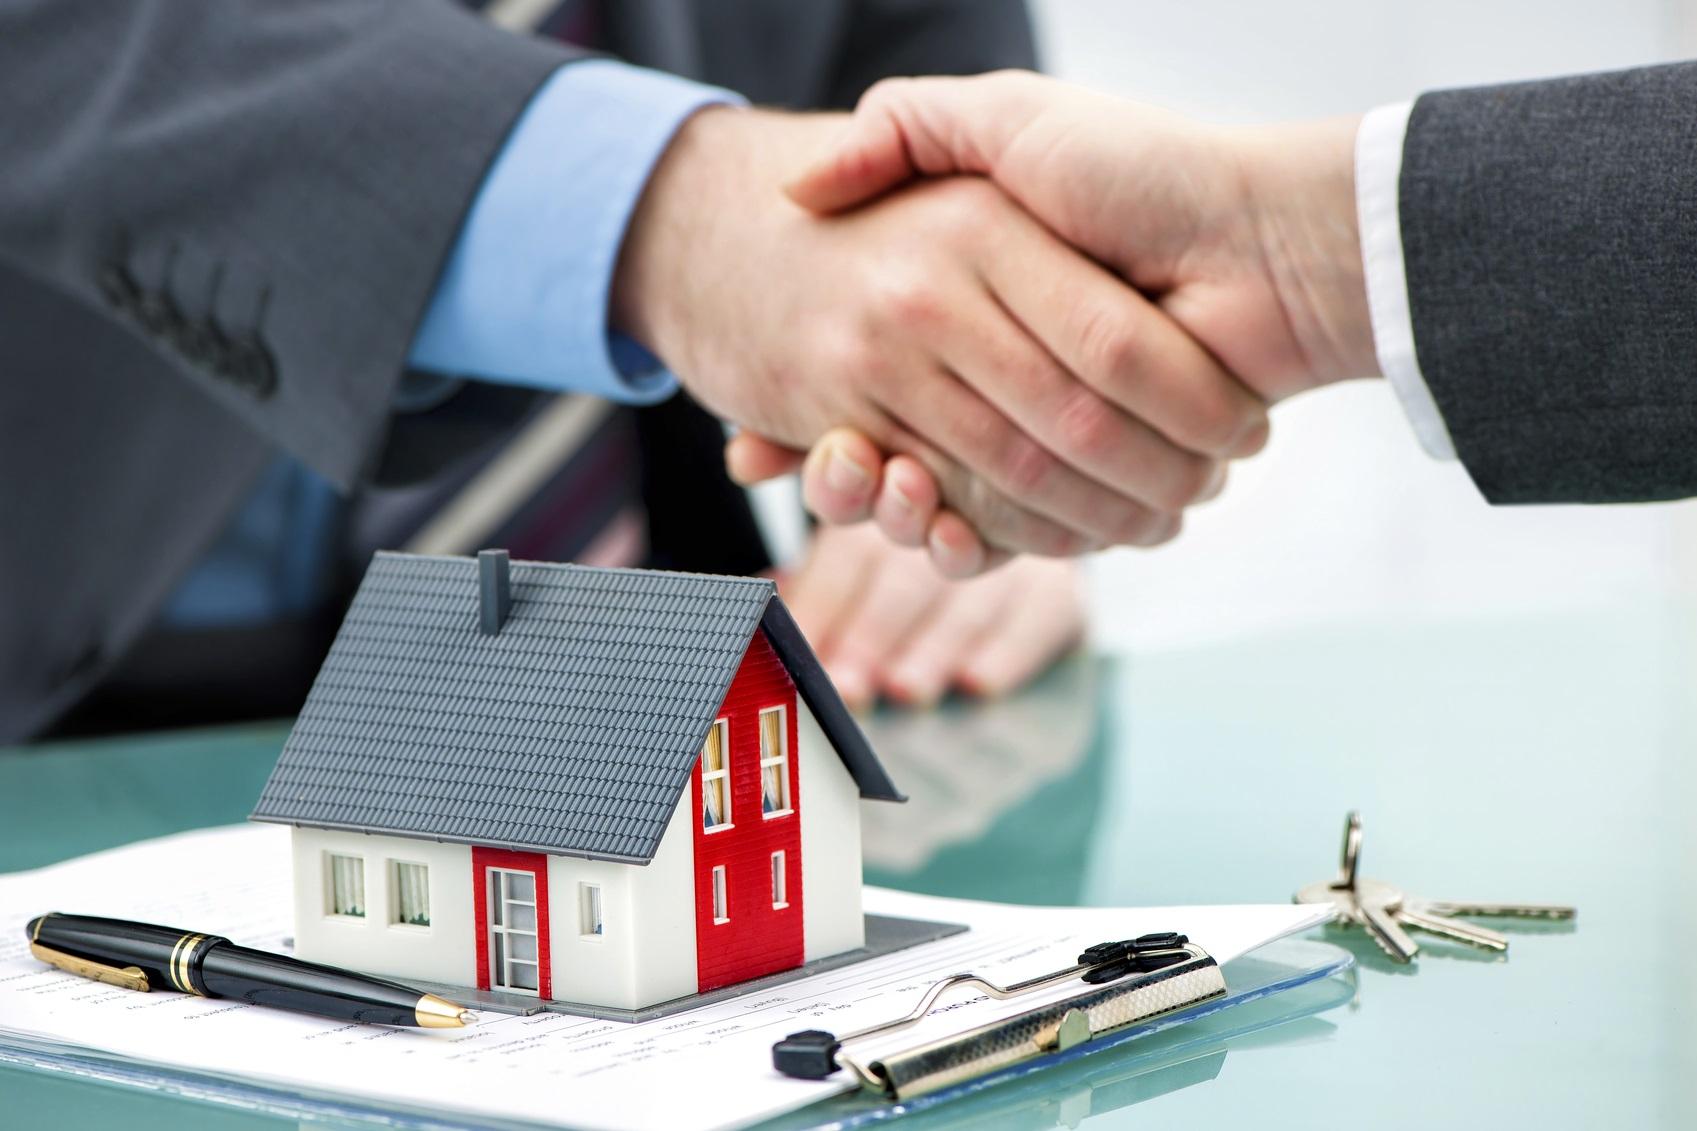 Real Estate Contract & Purchase Agreement - CE FREE and 25 Hour Post License Duluth